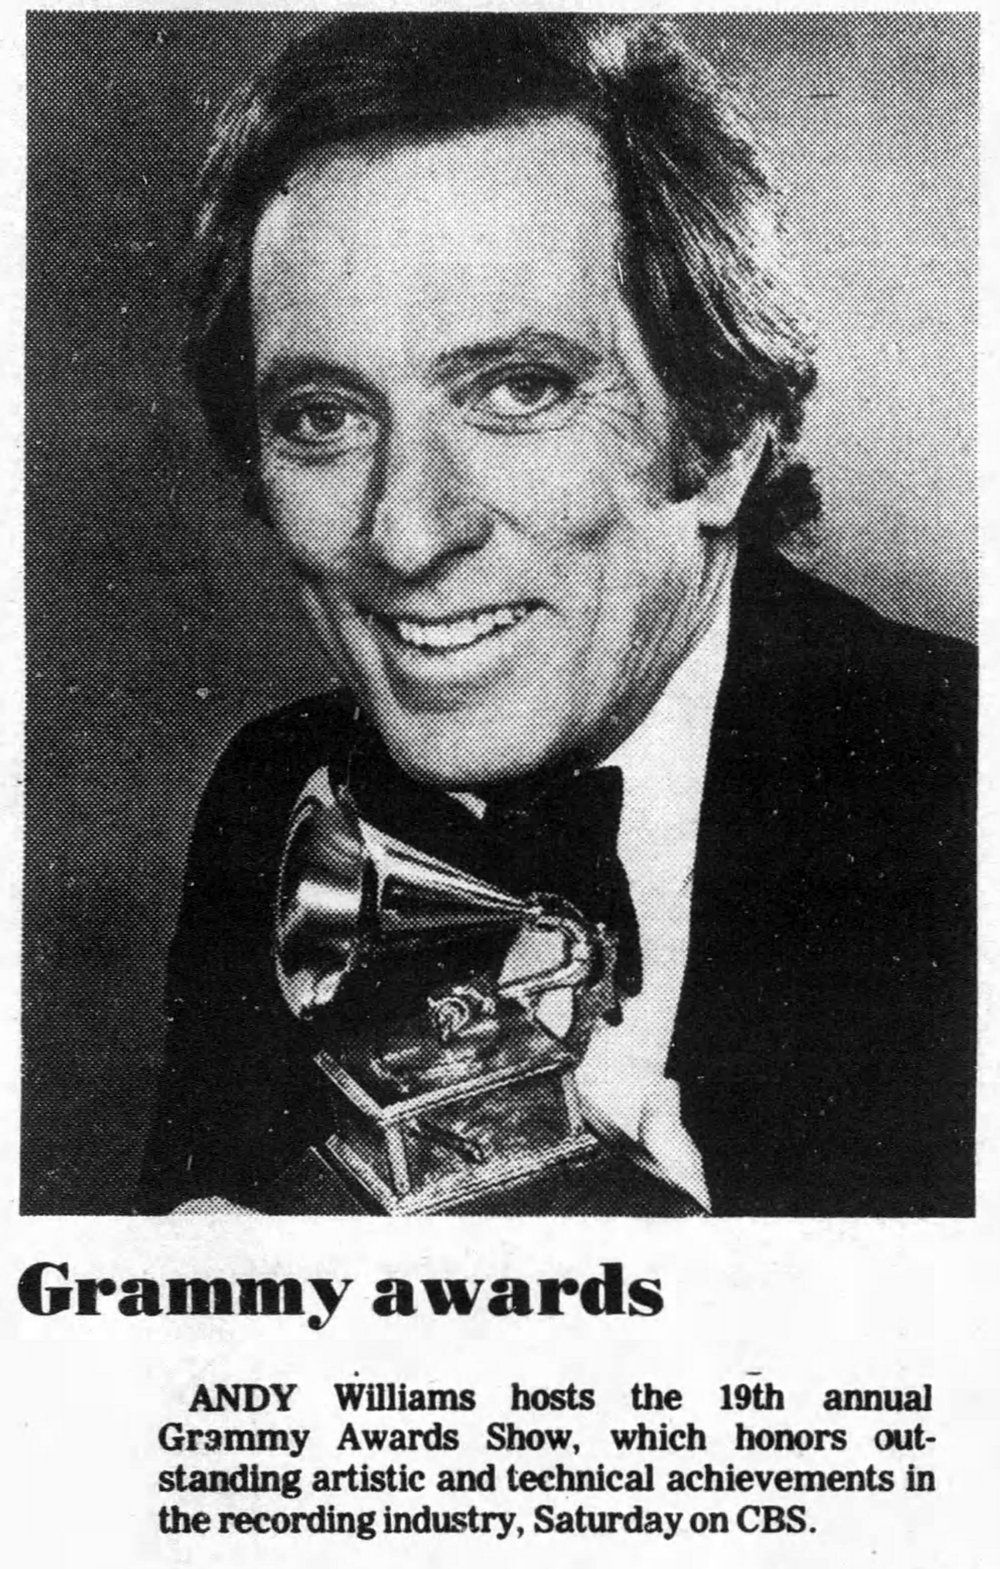 Newspaper ad for the 1977 Grammy Awards with hot Andy Williams pictured.